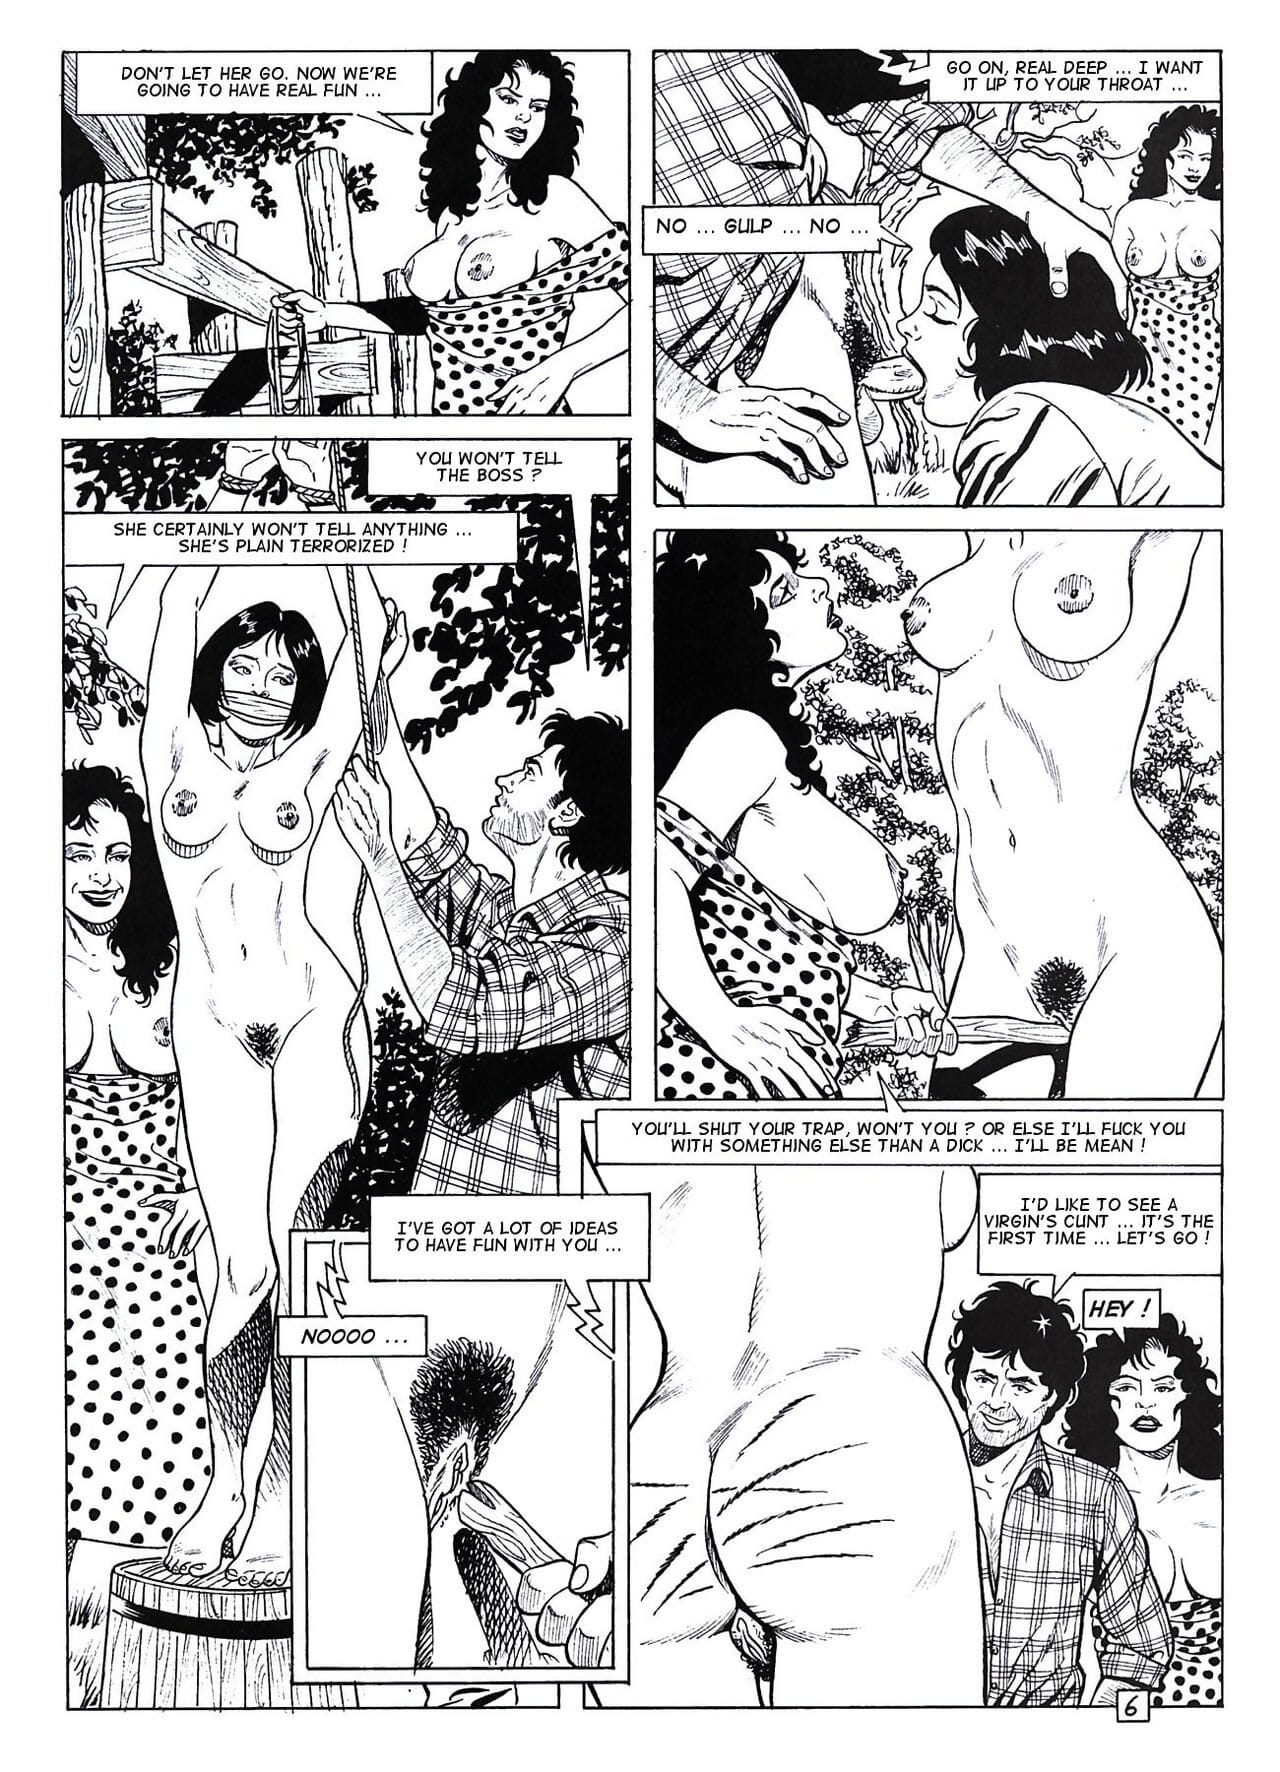 The Birches of Desire page 1